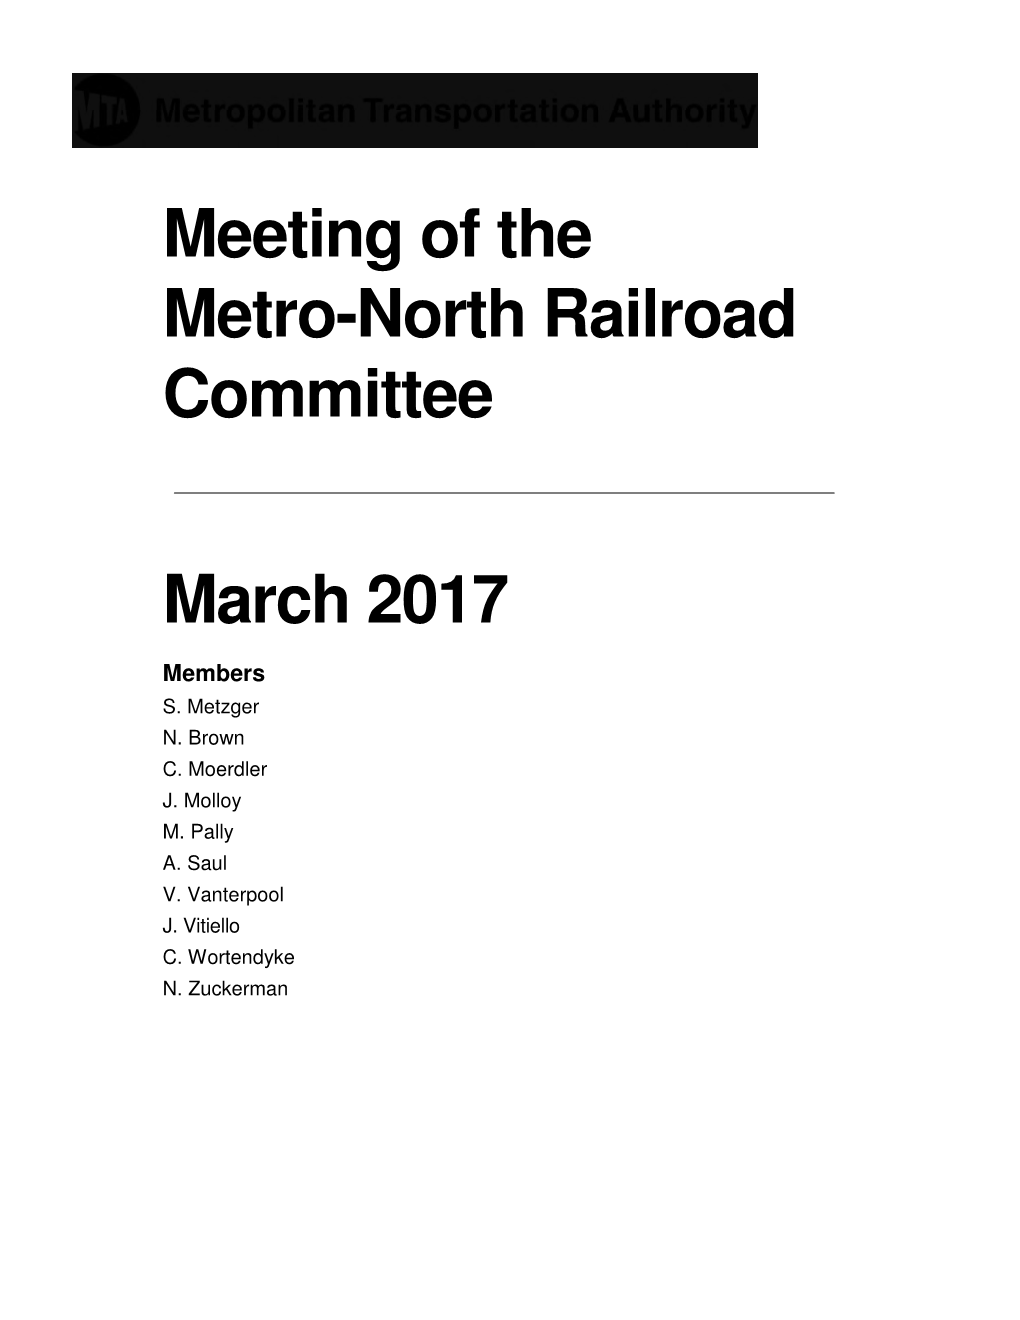 Meeting of the Metro-North Railroad Committee March 2017